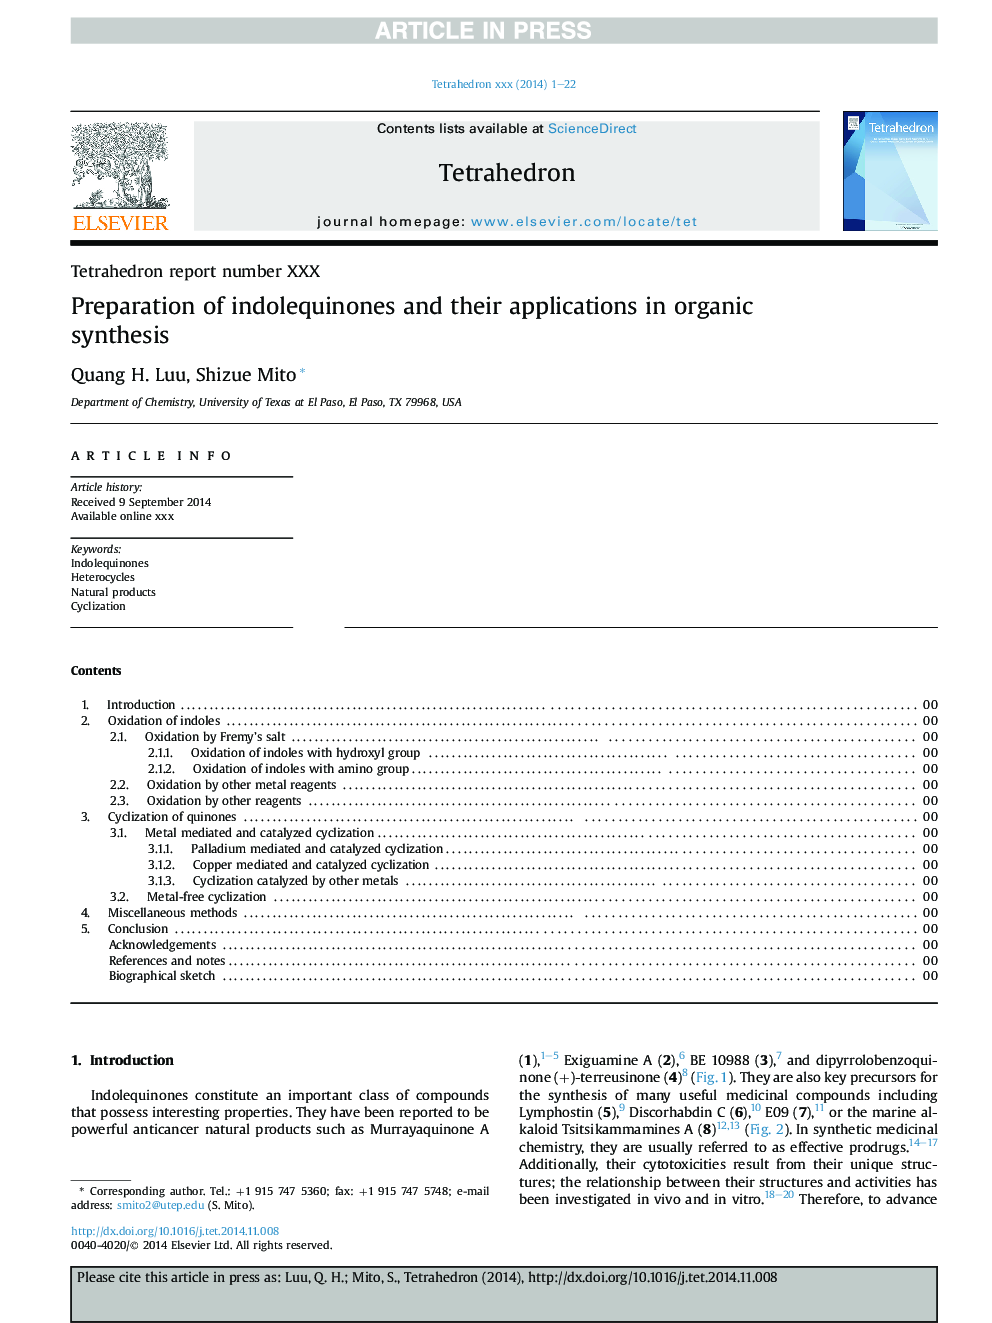 Preparation of indolequinones and their applications in organic synthesis